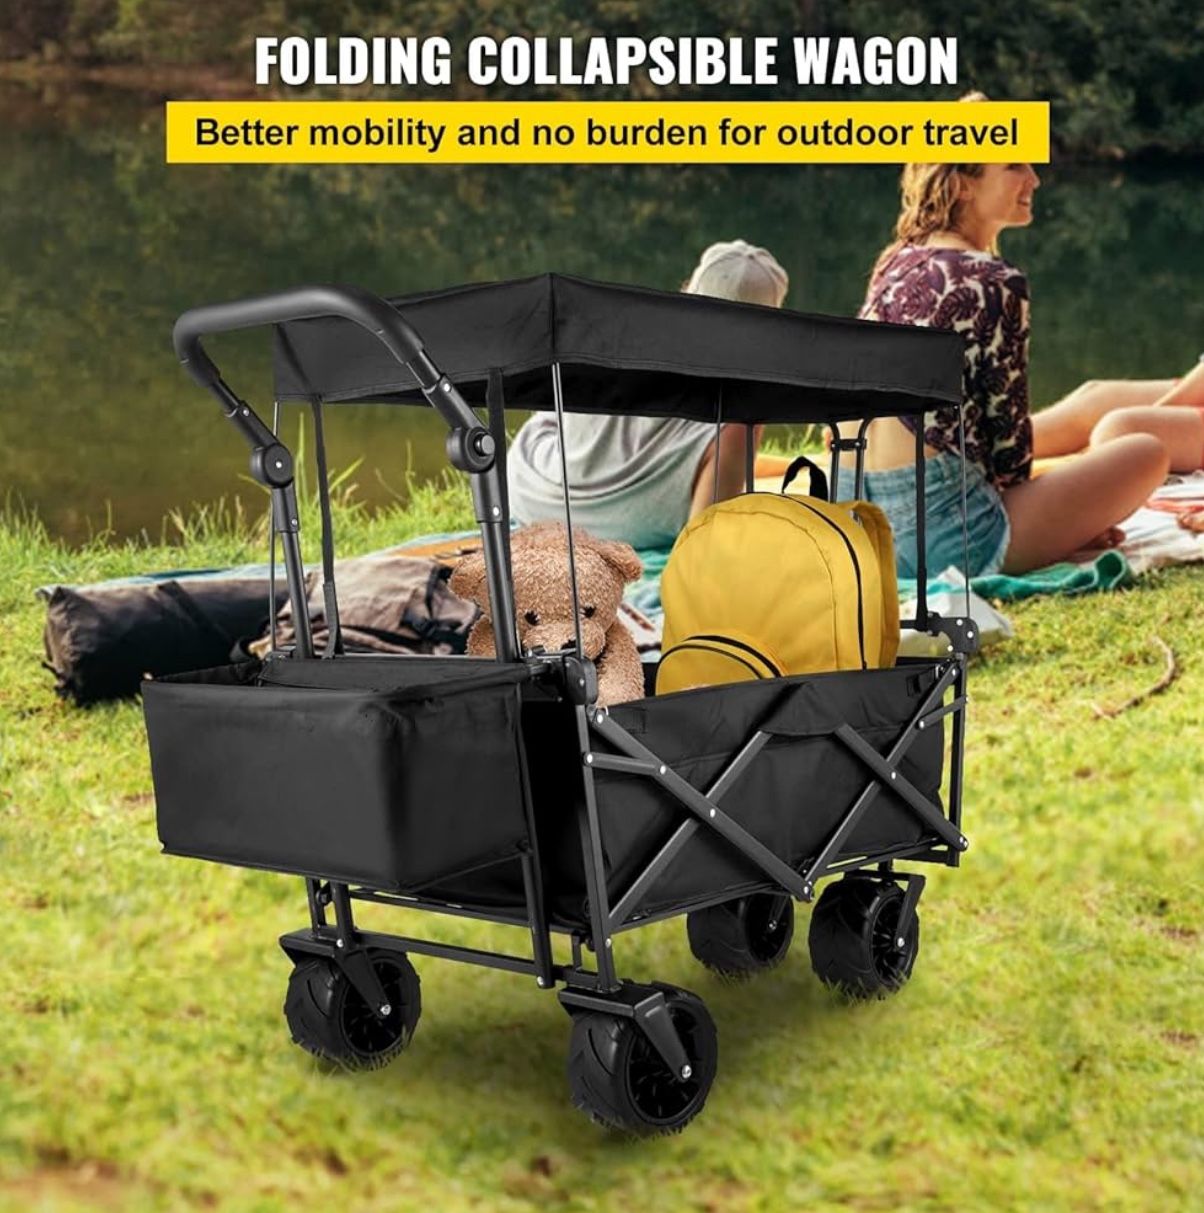 Collapsible Wagon with Canopy, 220lbs Foldable Wagon Stroller for Kids, Beach Wagon Cart with Big Wheels and Canopy with Adjustable Push Pulling Handl